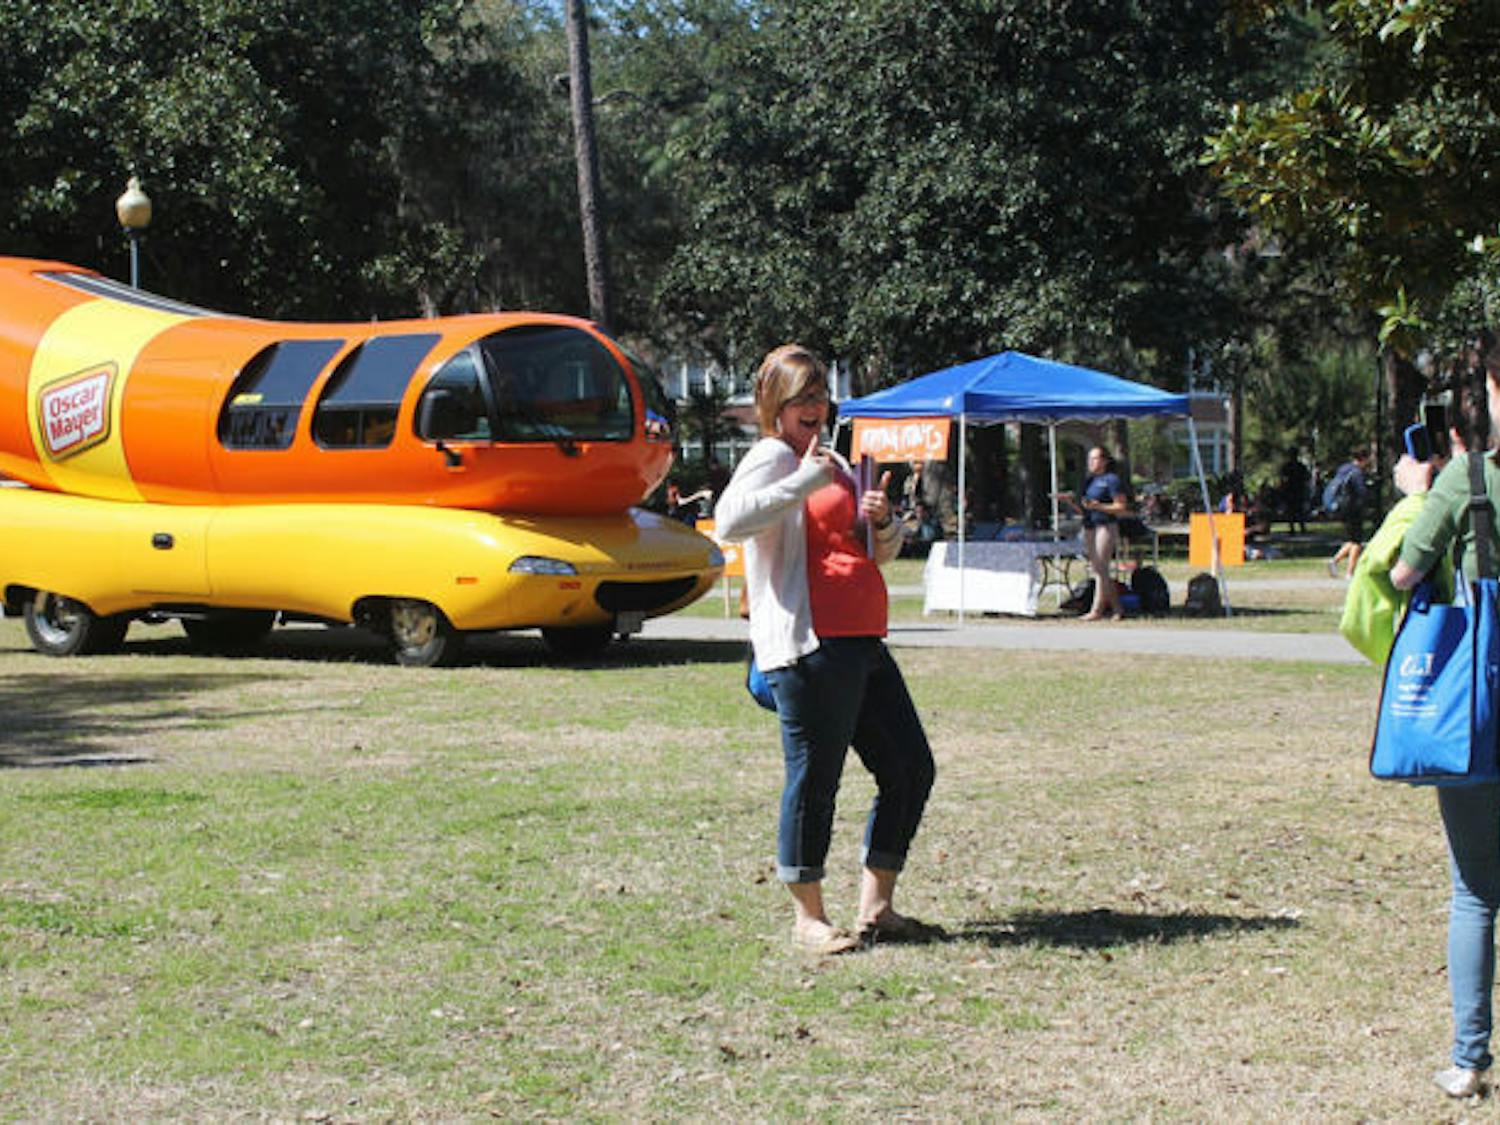 &nbsp;
Kristina Dorman, an 18-year-old UF elementary education junior, takes a picture of 21-year-old Calie Hinnrichs, also an elementary education junior, with the Oscar Mayer Wienermobile on the Plaza of the Americas Wednesday.